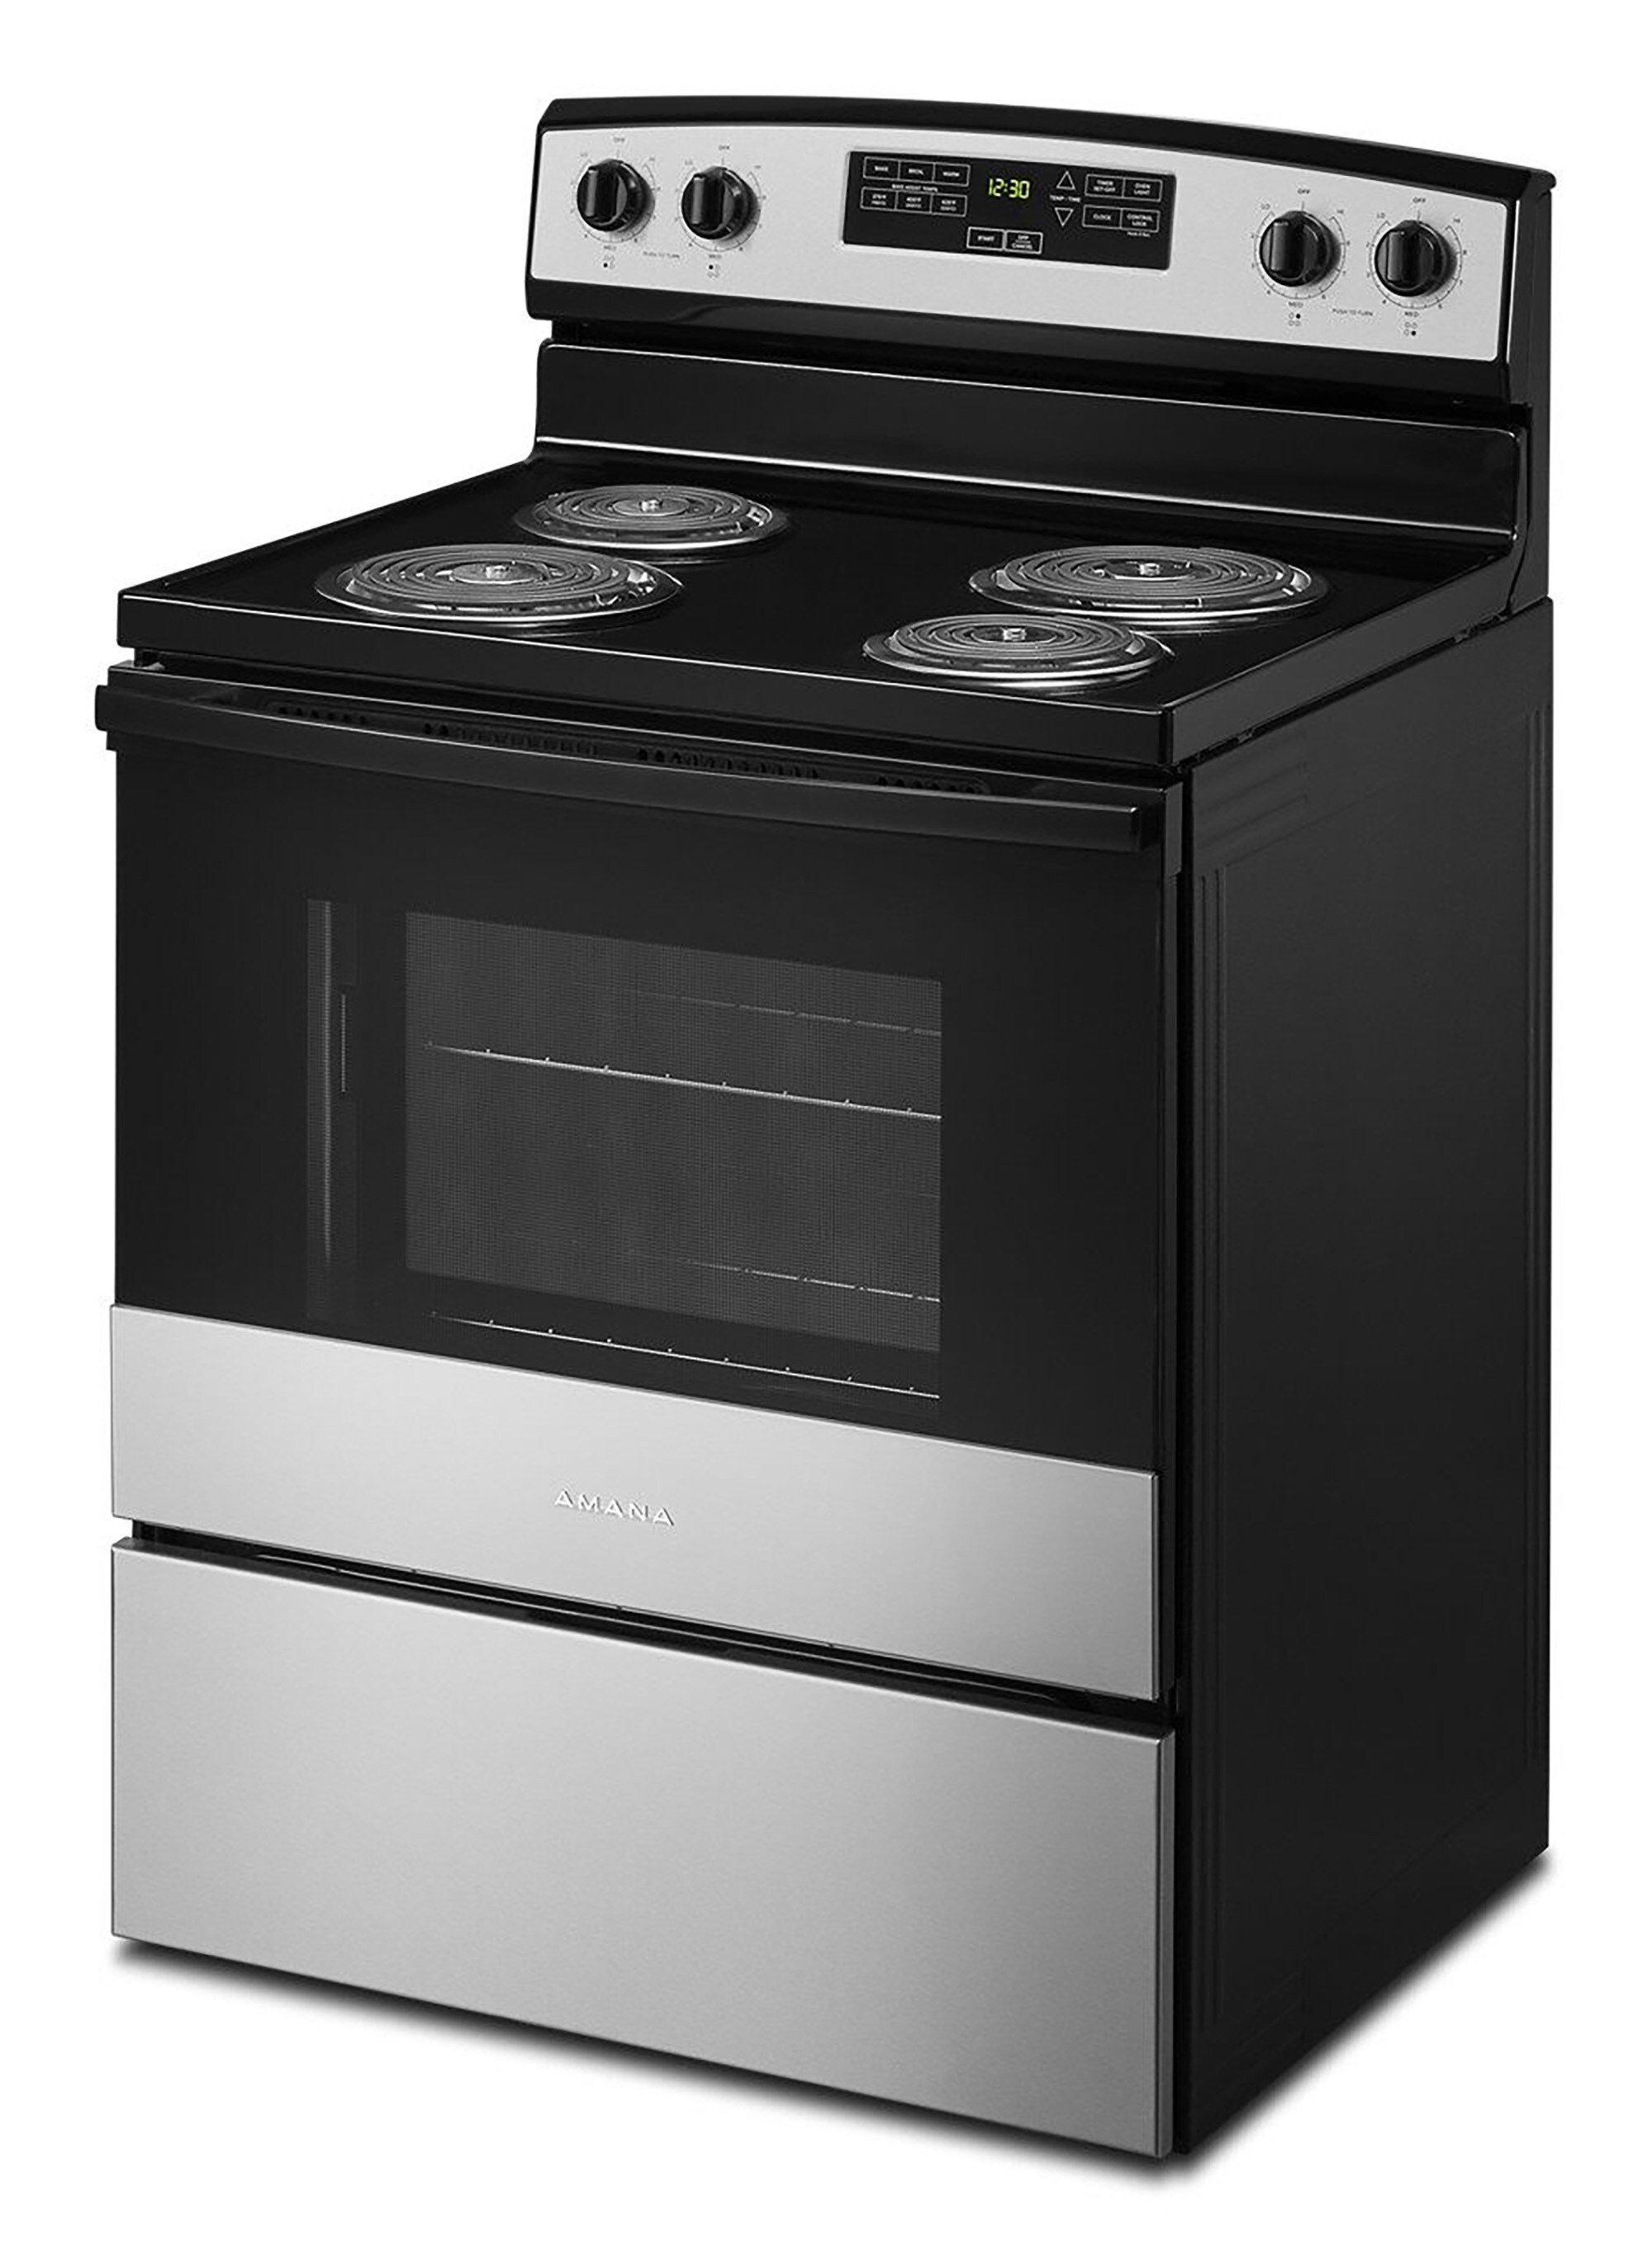 Frigidaire 30-Inch Electric Range in White - FCRE3052BW